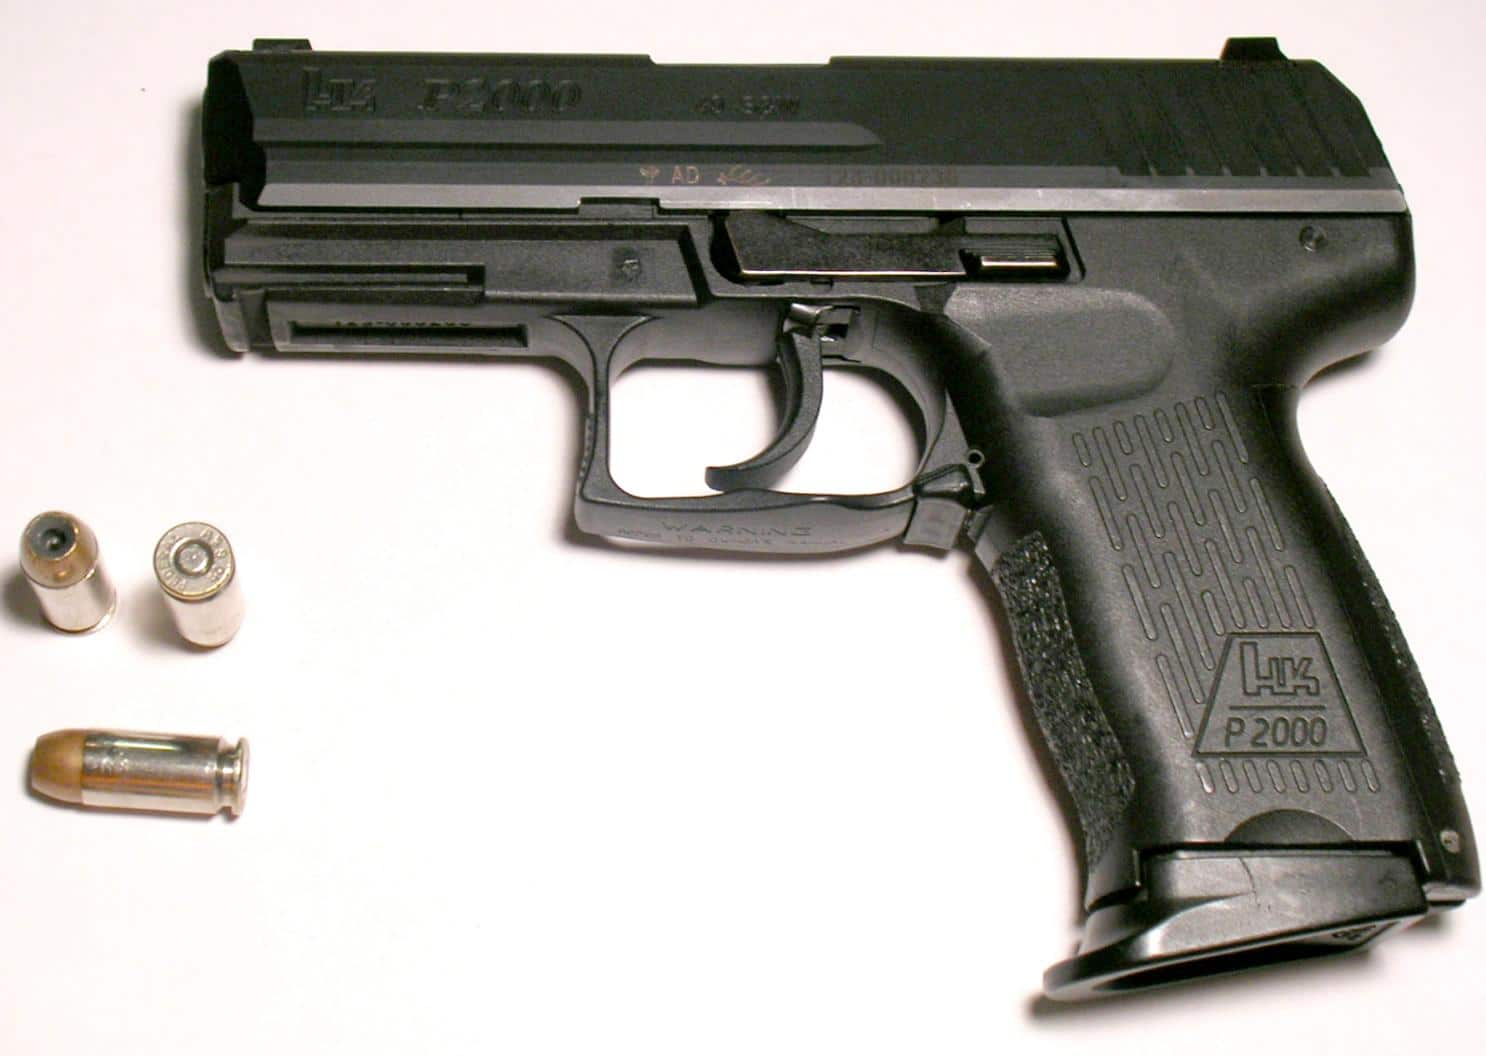 Meet the Heckler and Koch P2000 Compact Pistol: Best Gun from Germany?